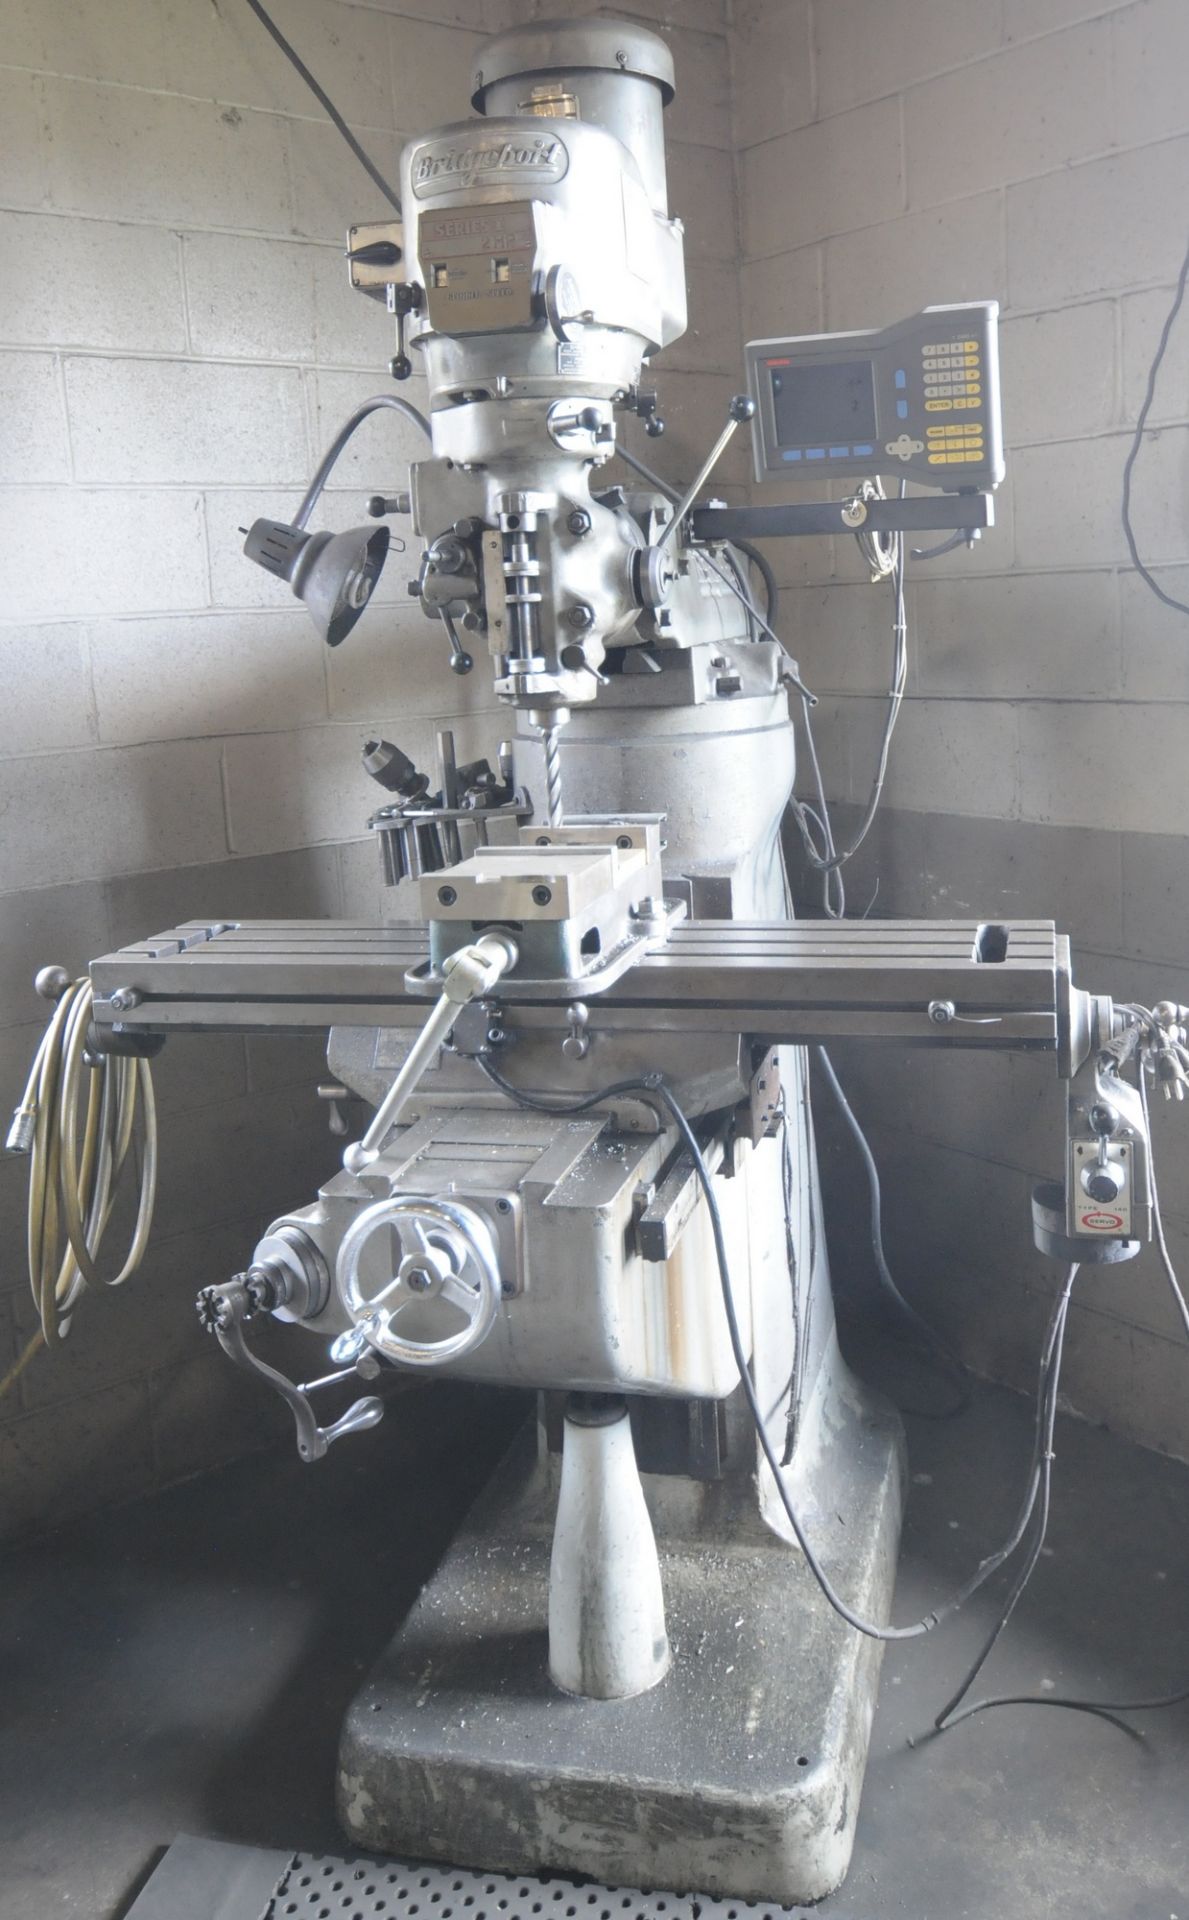 BRIDGEPORT SERIES I VERTICAL MILLING MACHINE WITH ANALIM 2 AXIS DRO, 42"X9" TABLE, SPEEDS TO 4200